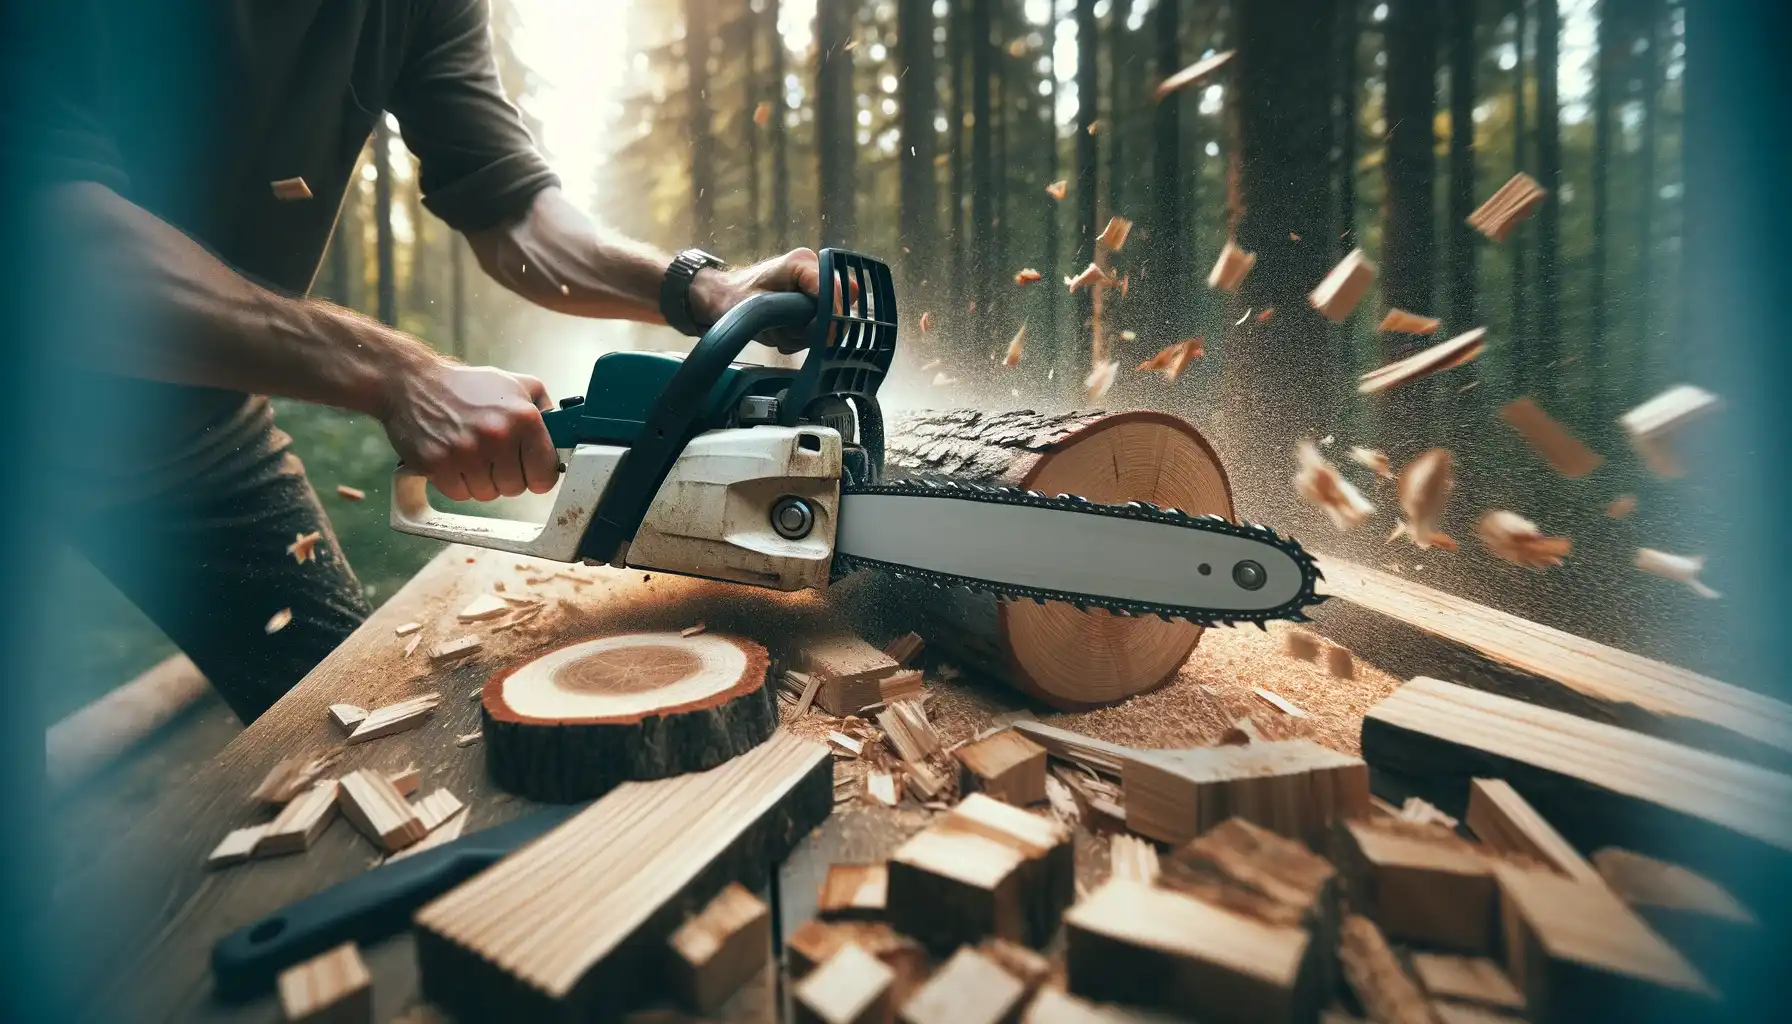 How to Cut Wood Slices With Chainsaw